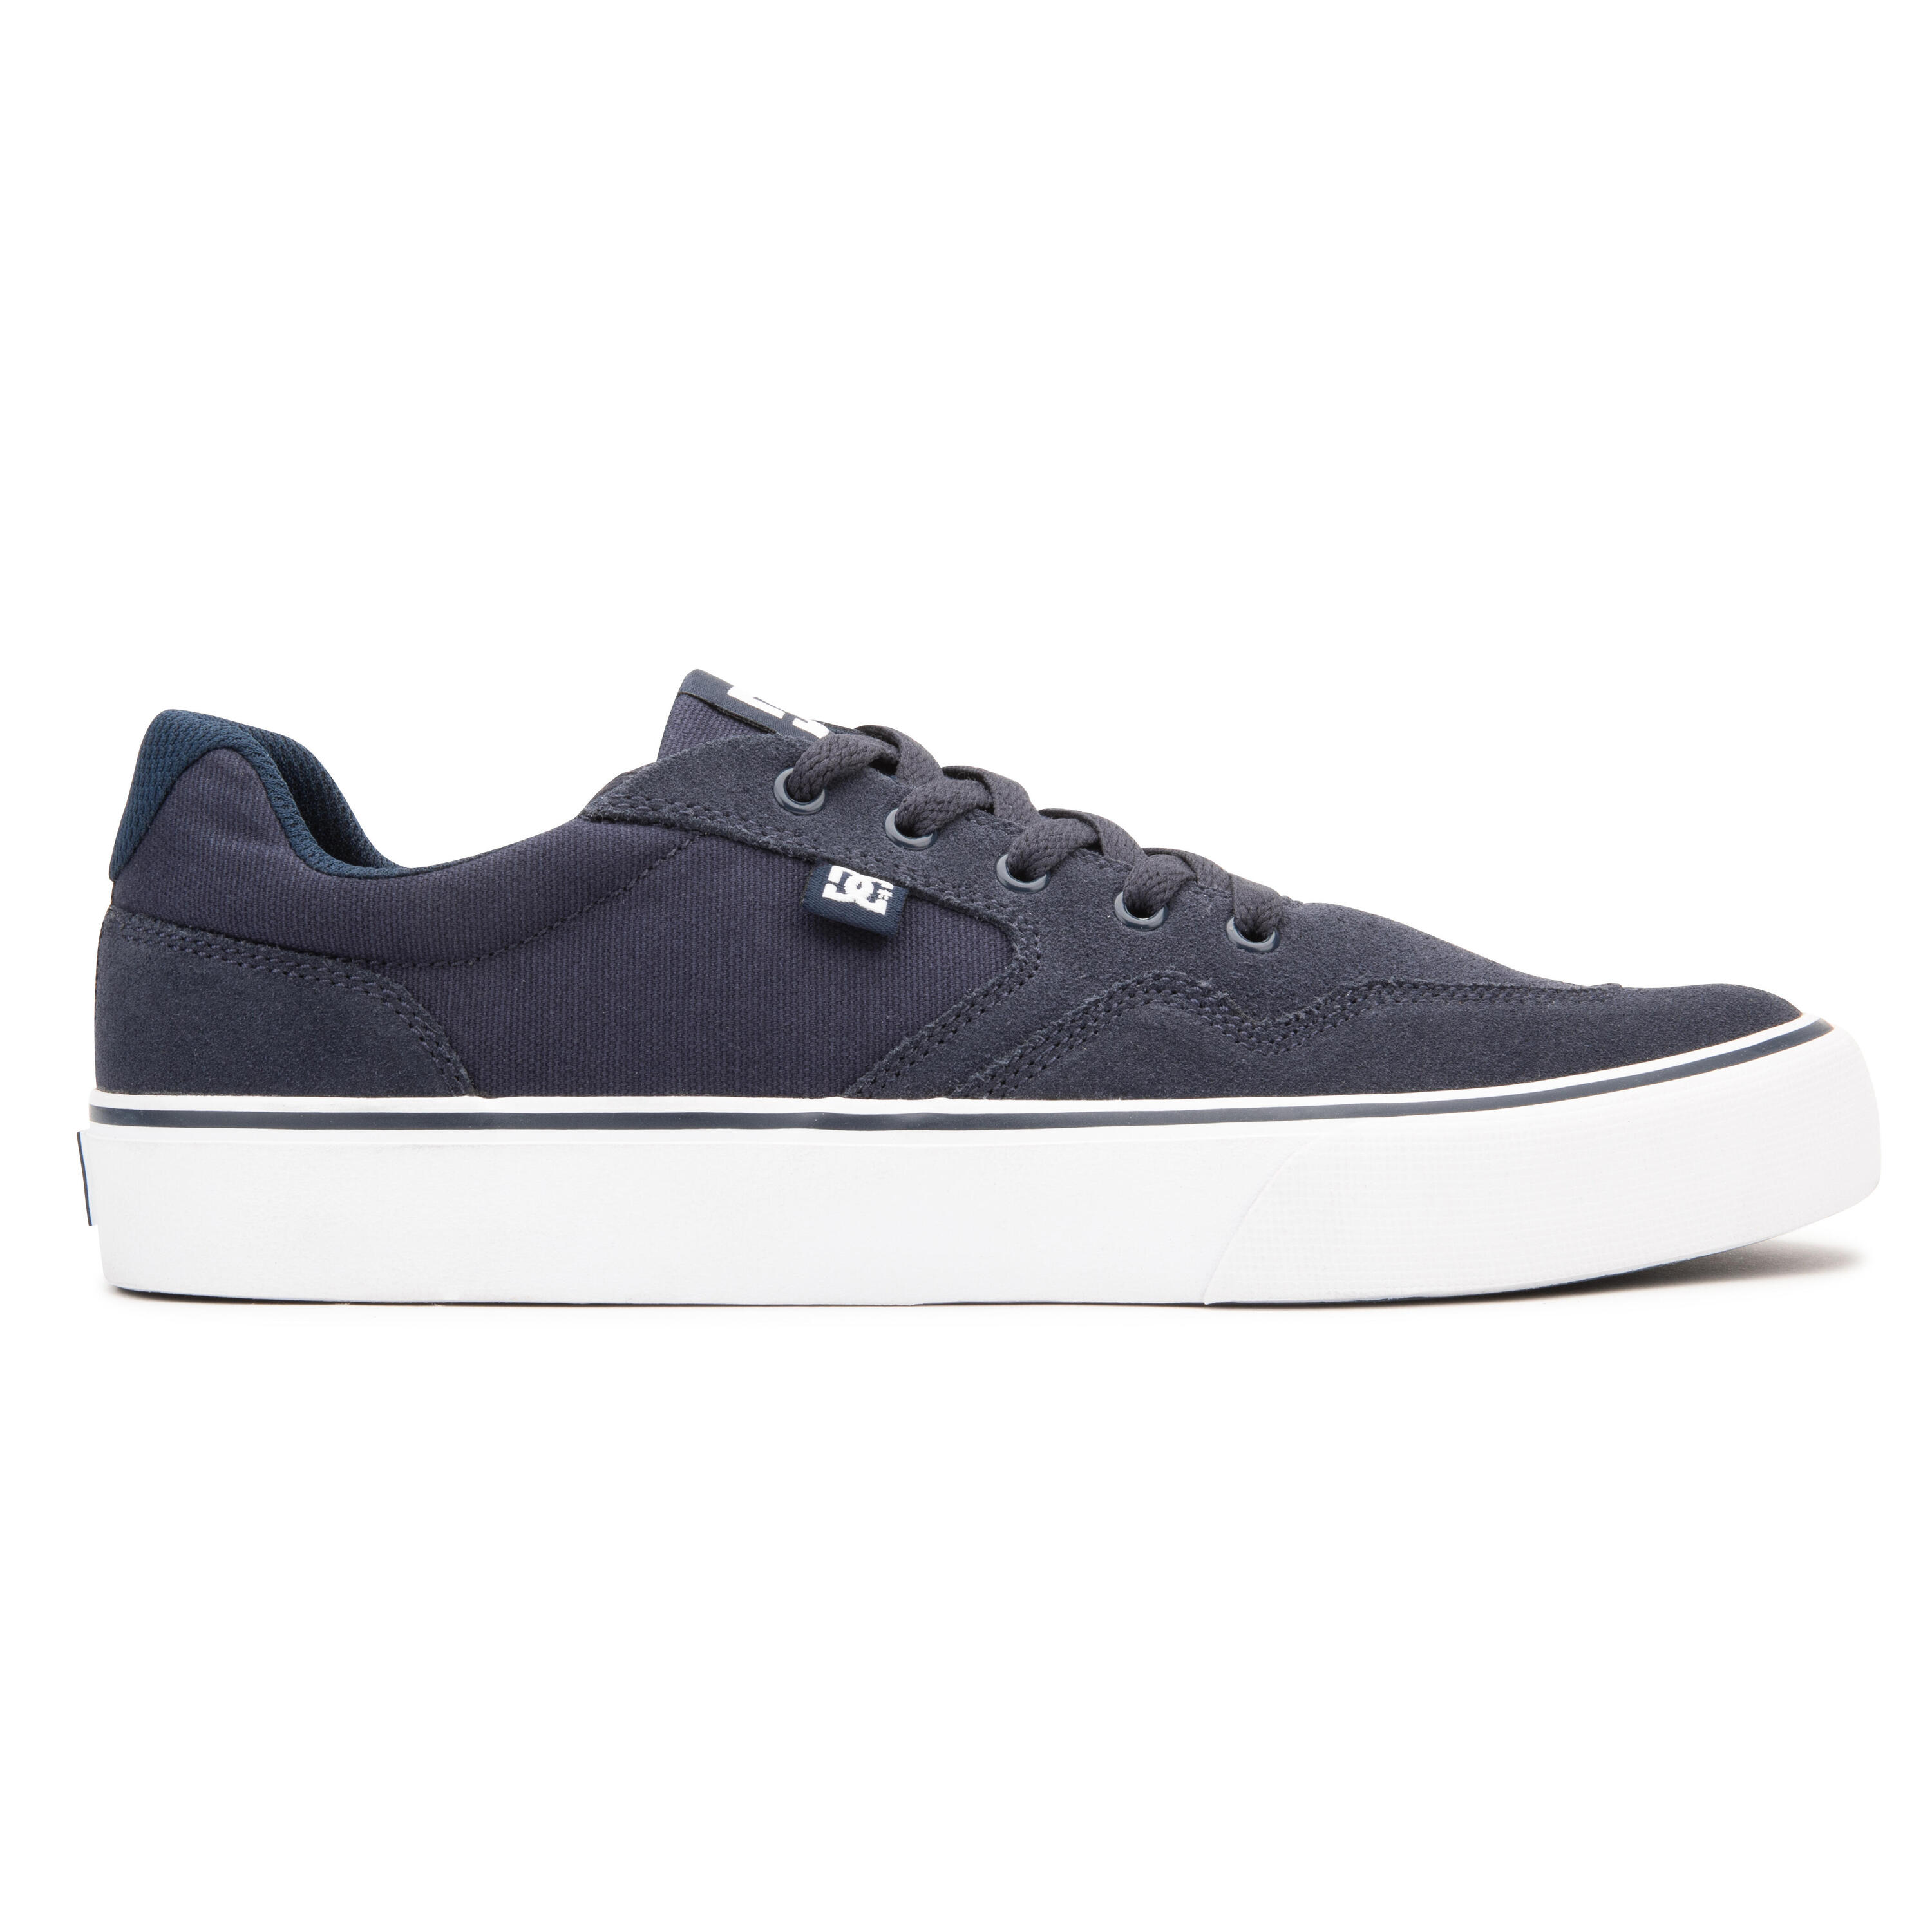 Adult Skate Shoes Rowlan - Blue 2/11